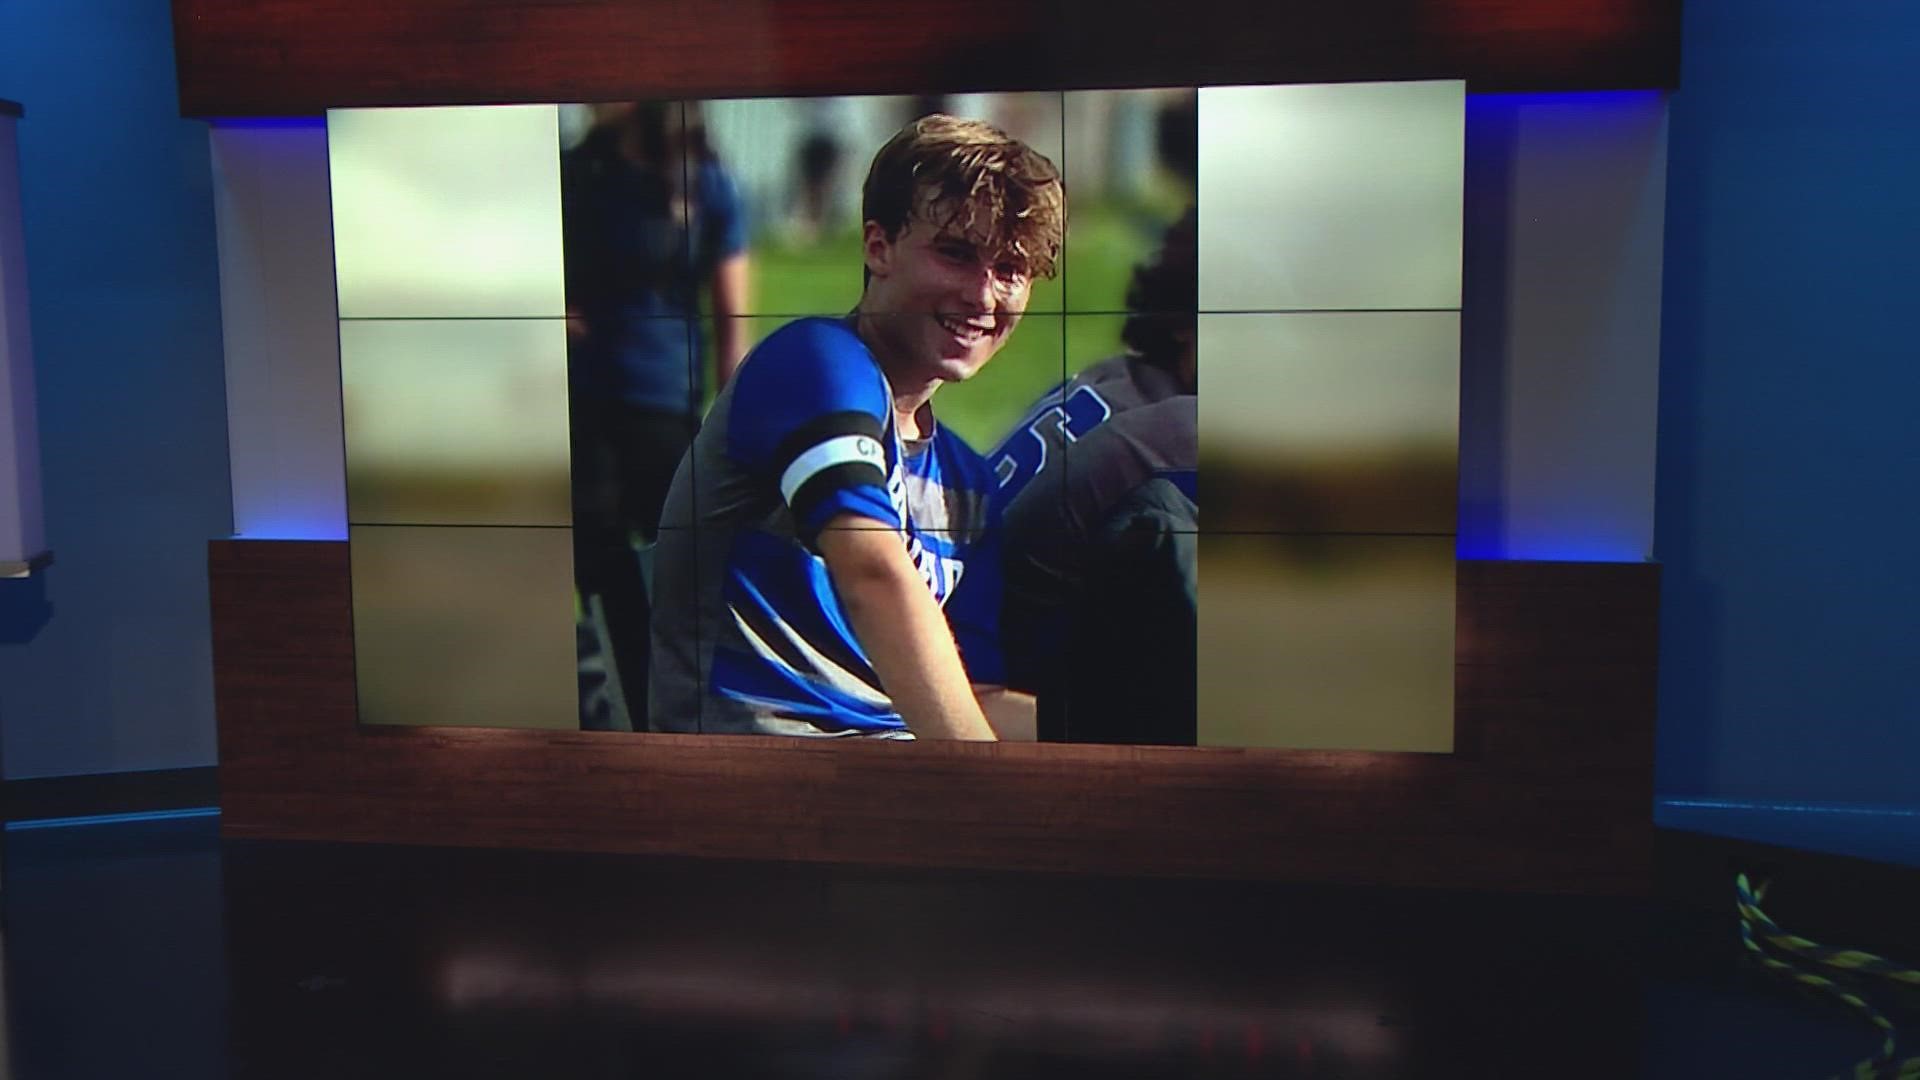 Broomfield High School soccer player Dominic DePalma was killed in a crash on July 28.